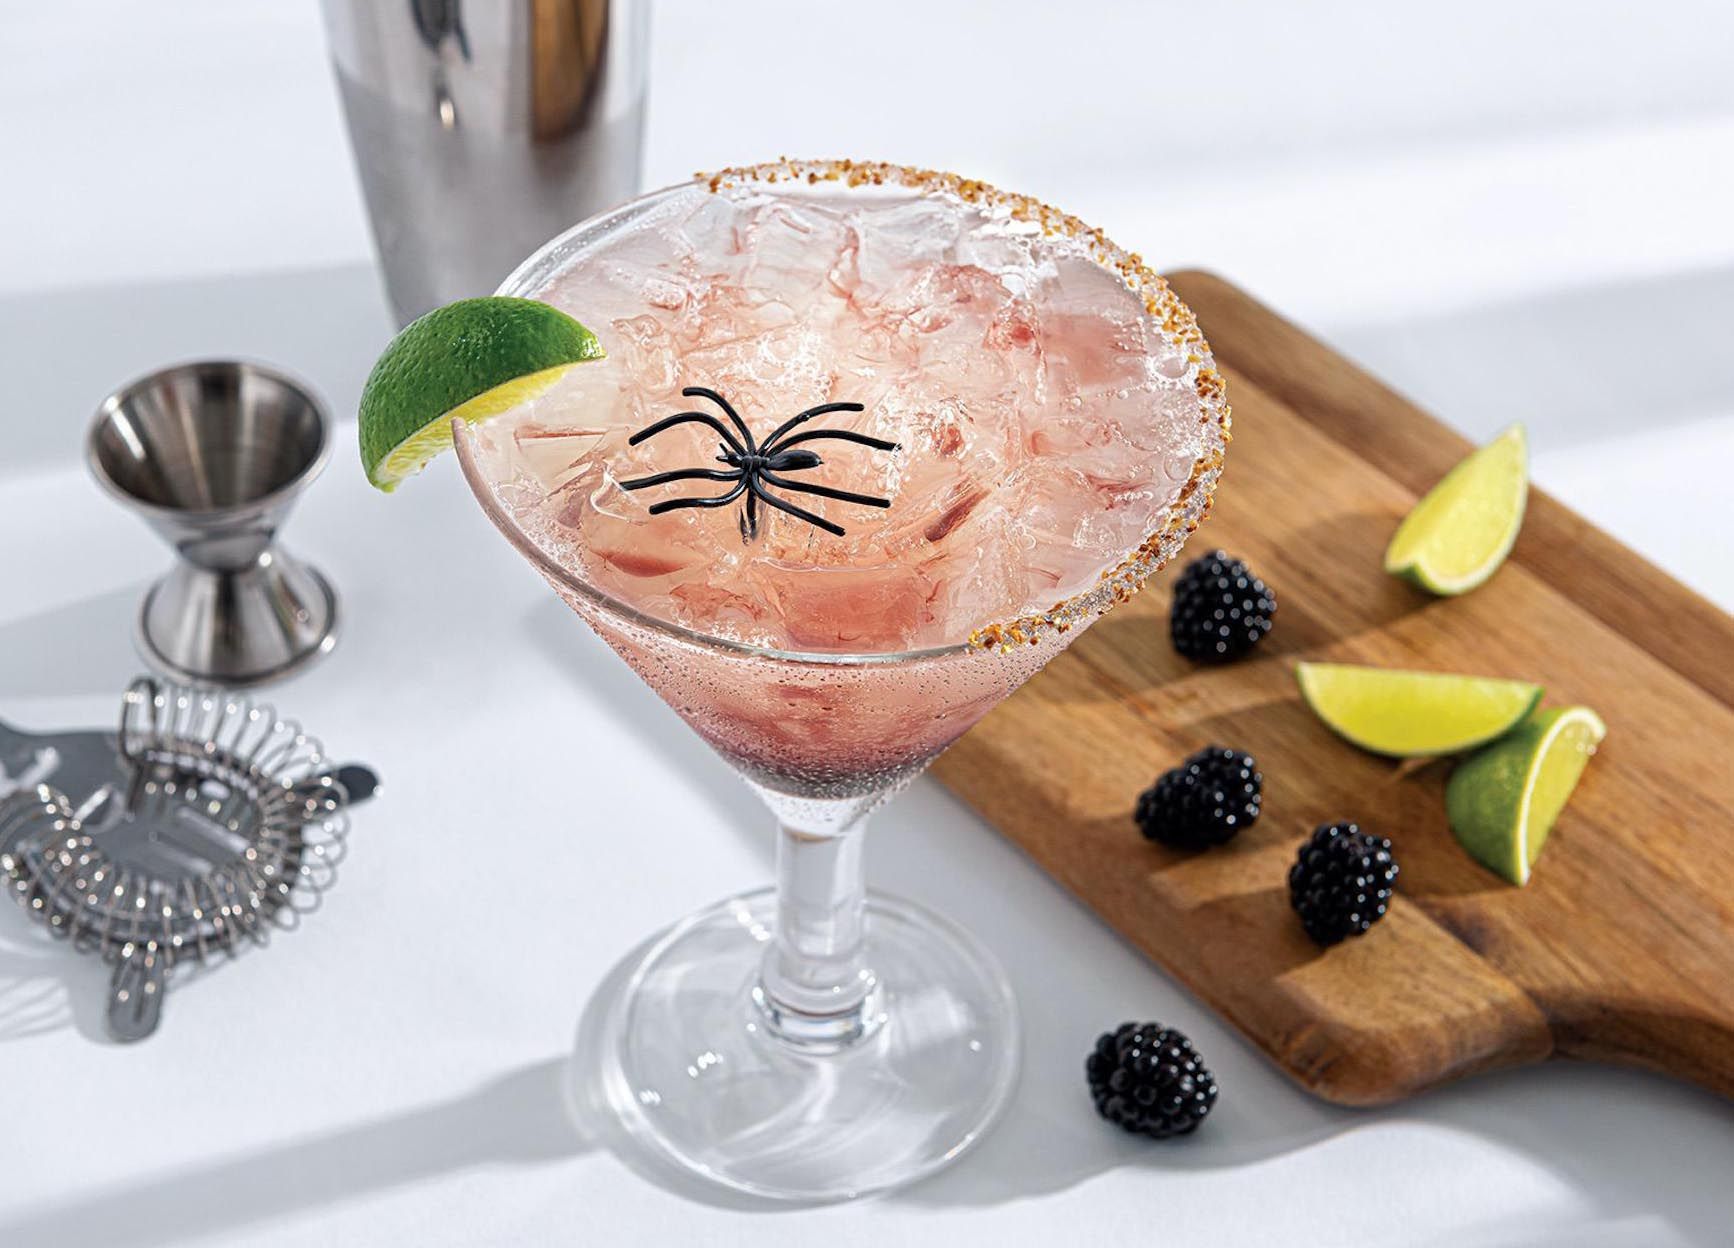 Chili’s Introduces the $5 Spider Bite ‘Rita, October's Margarita of the Month